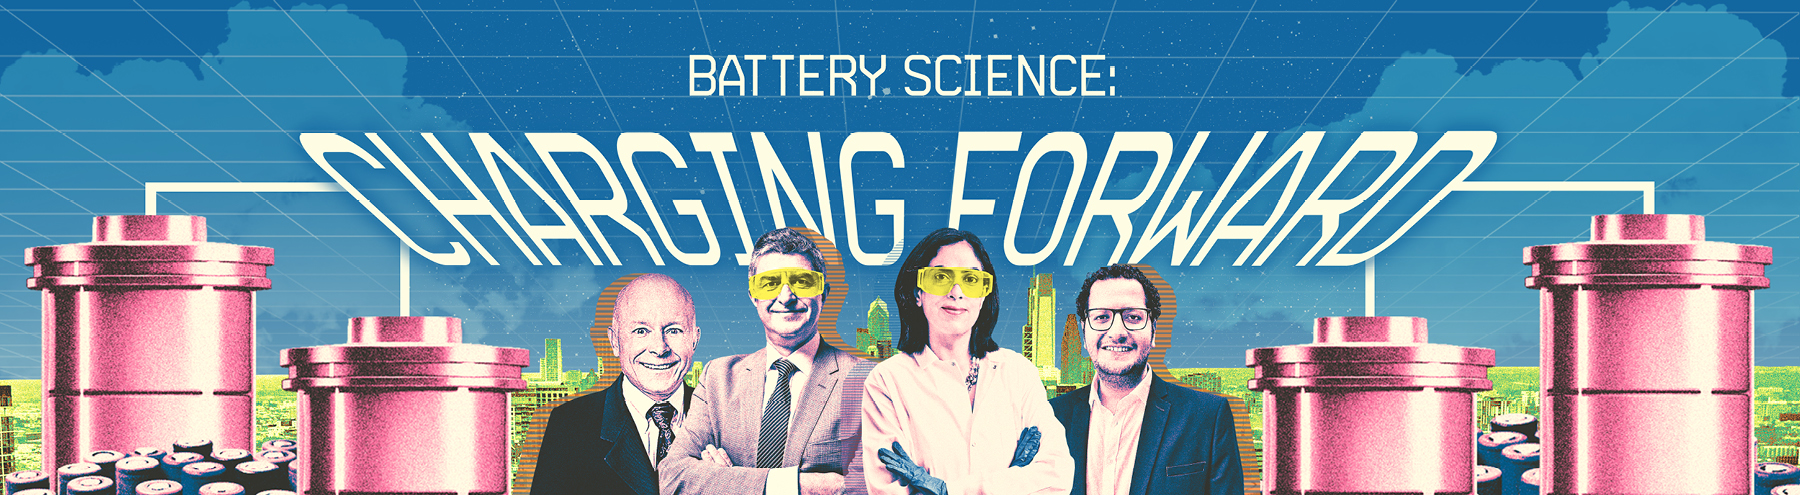 Battery Science: Charging Forward